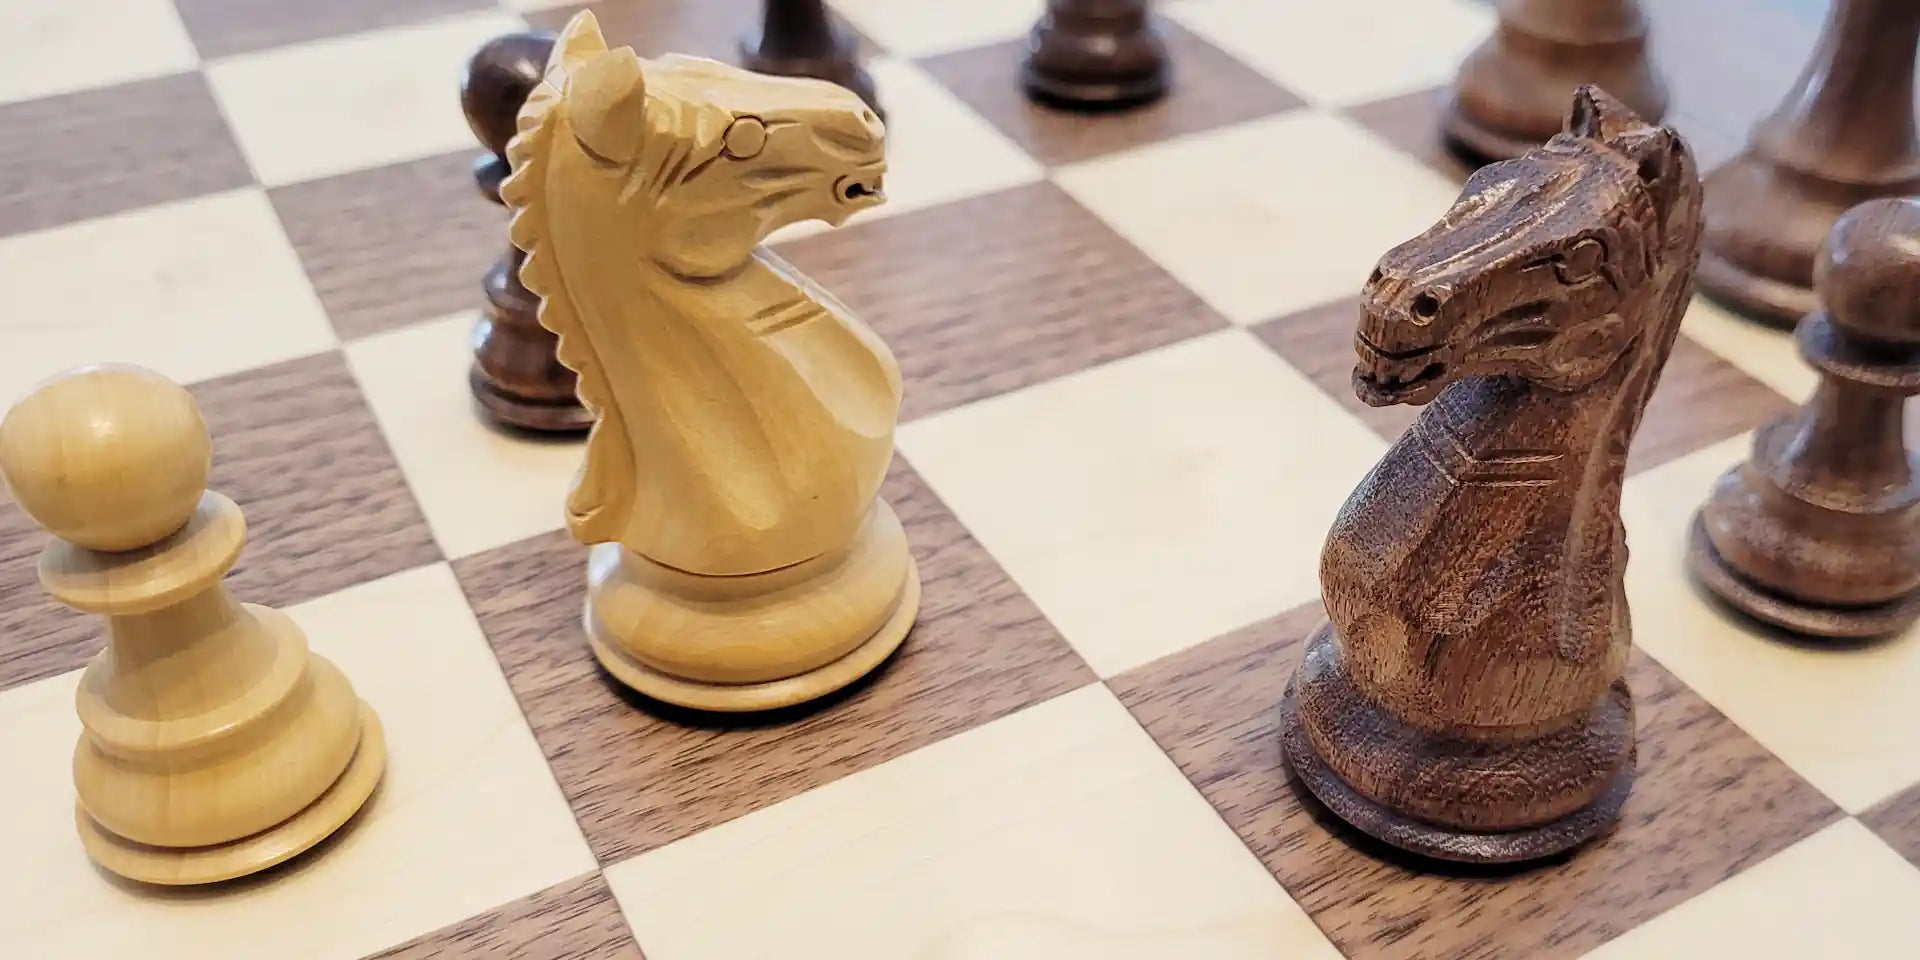 Supreme chess pieces on walnut chess board